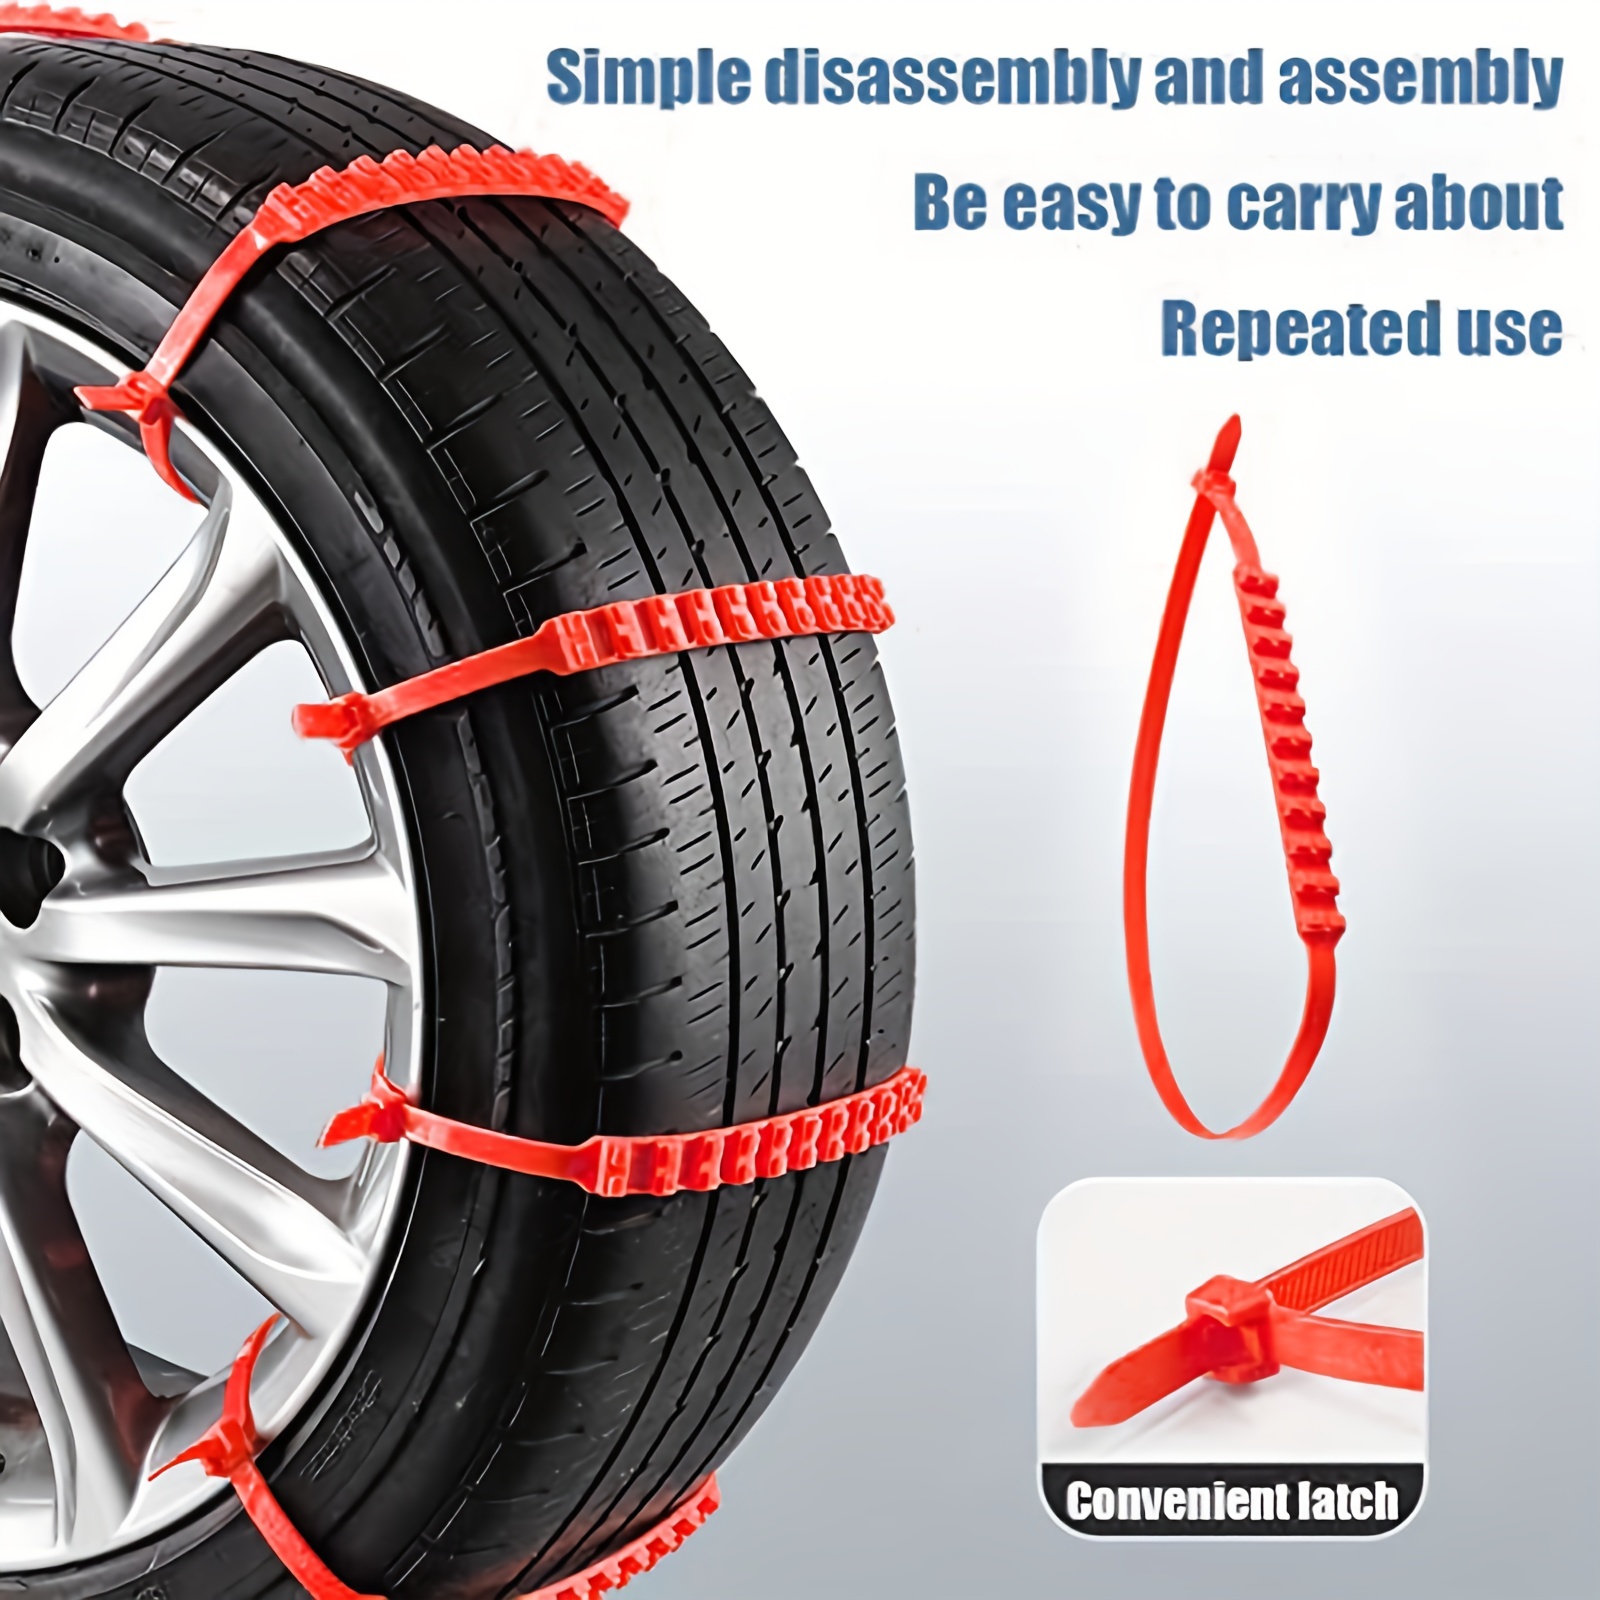 20PCS Reusable Anti Snow Chains of Car，Universal Adjustable Emergency  Portable Snow Tire Chains for Car SUV Pickup Trucks Car Snow Chains  Non-Slip